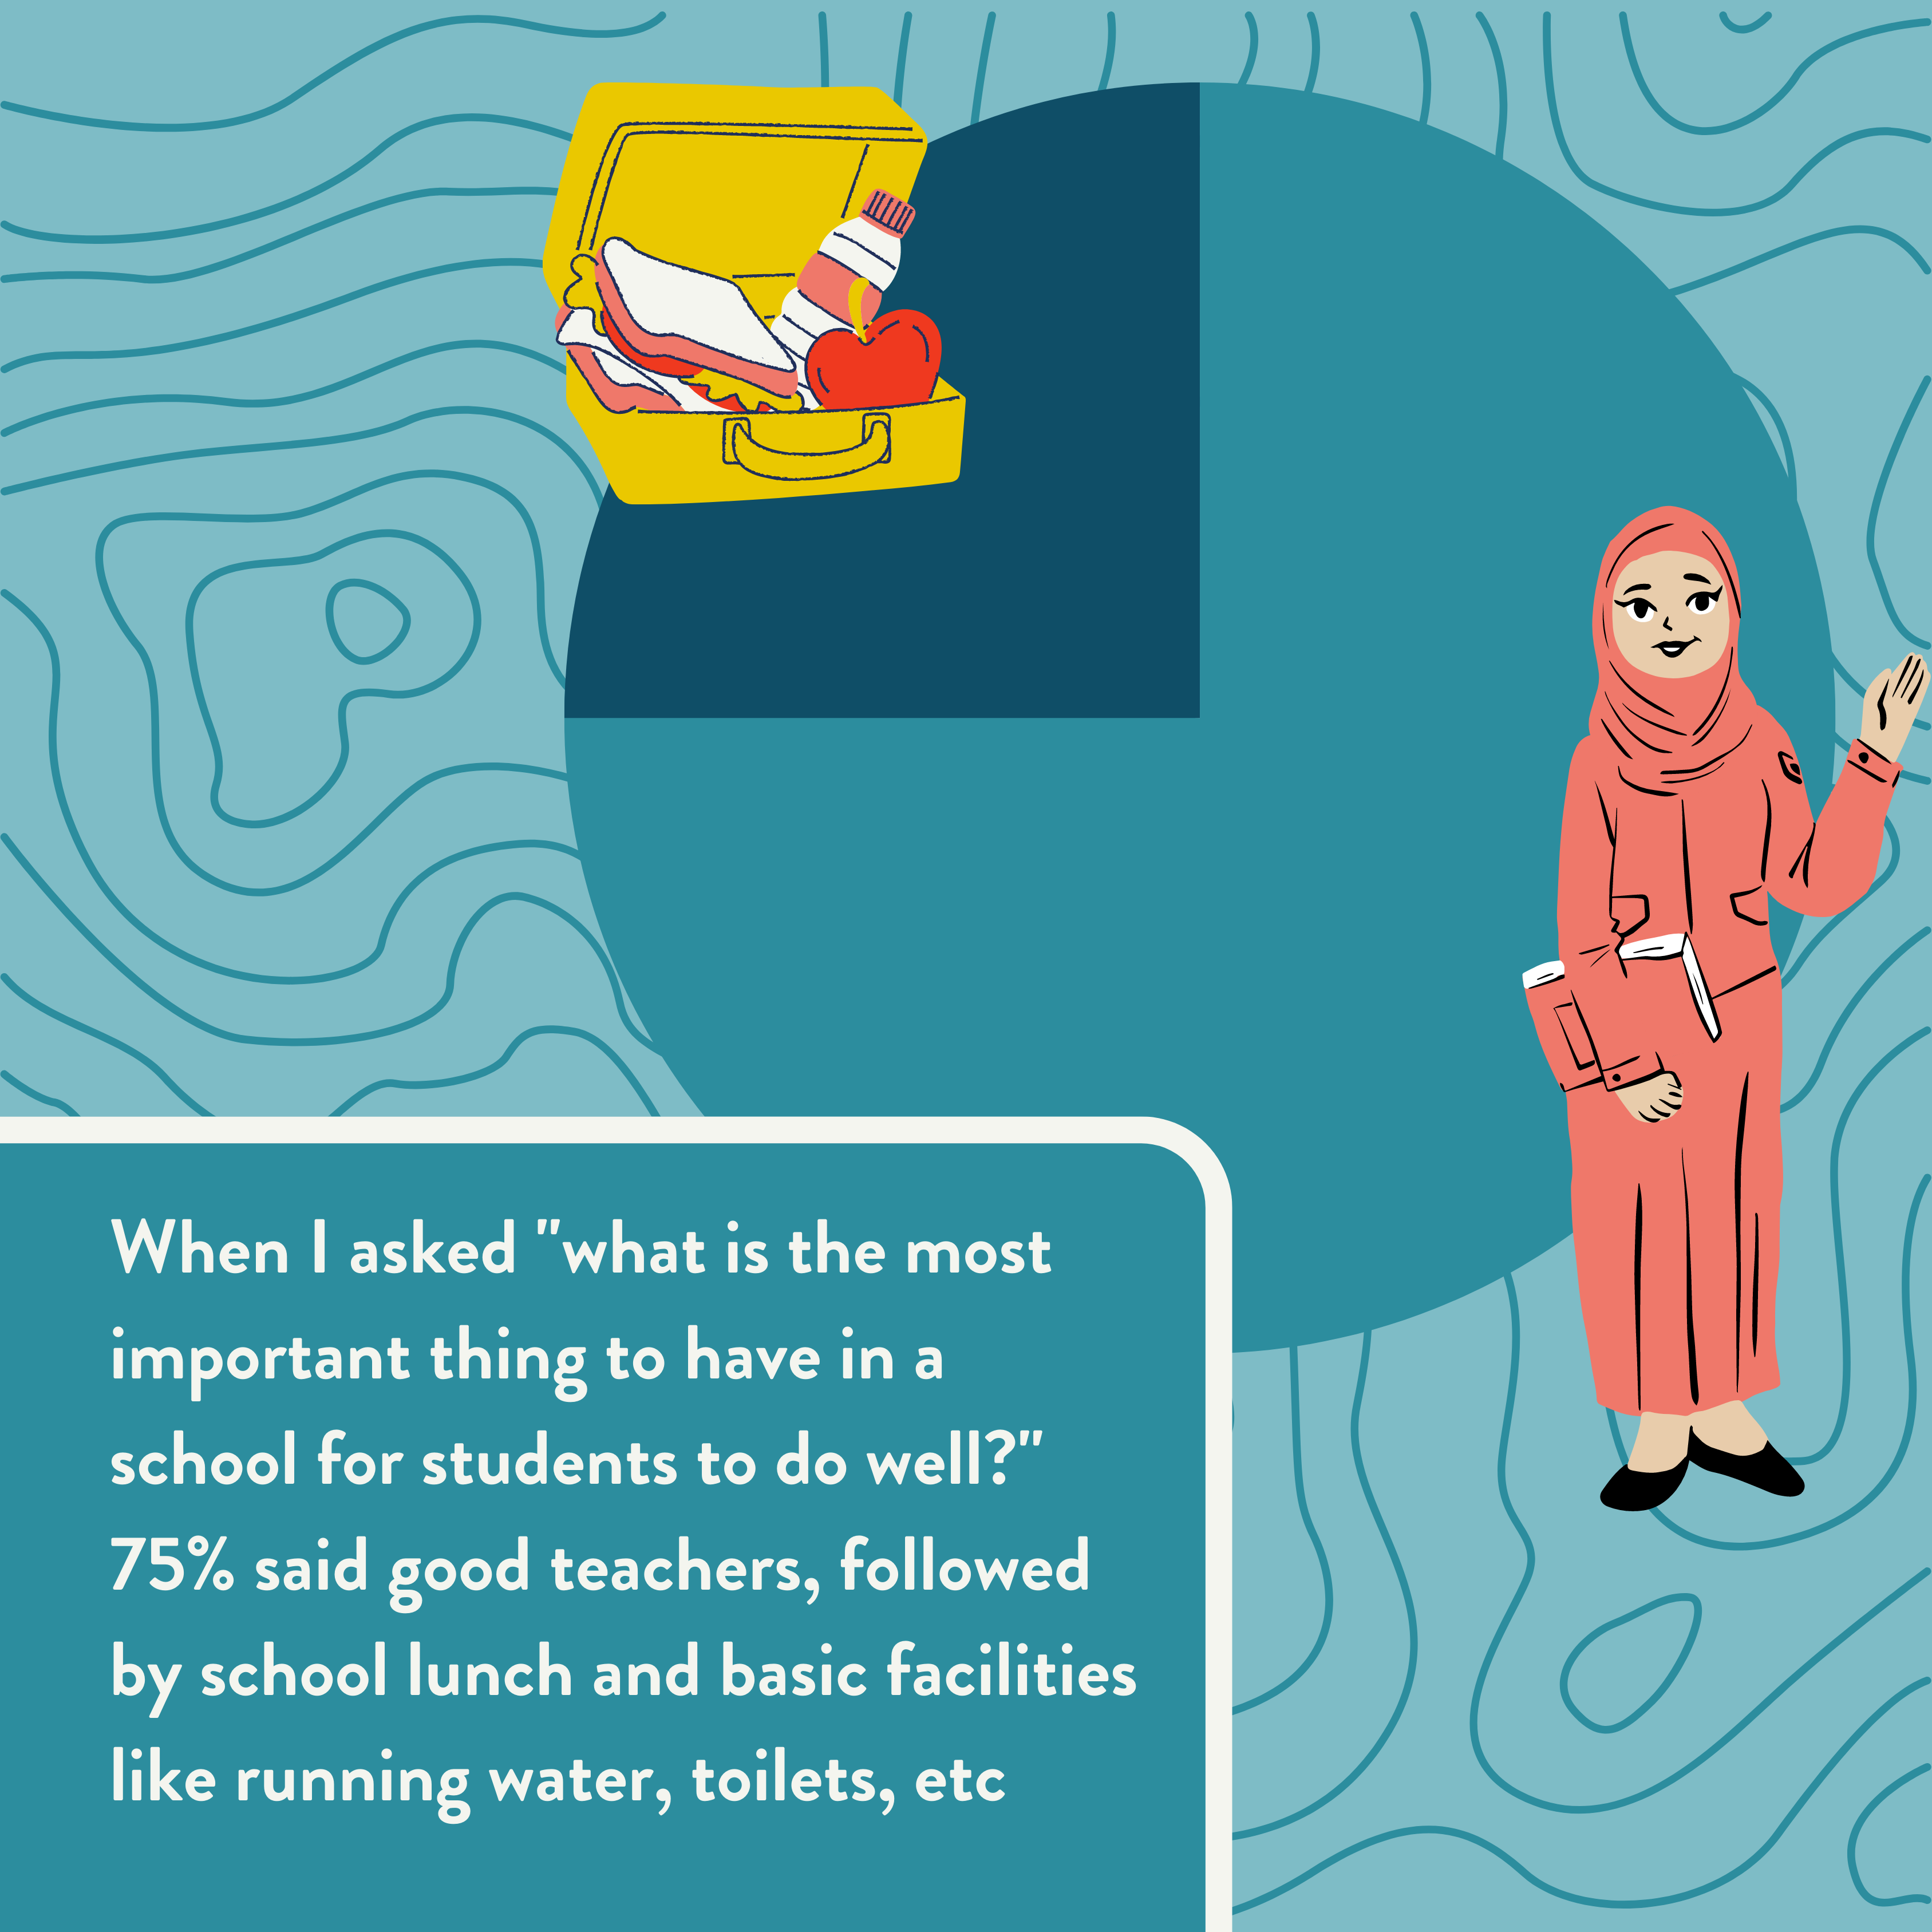 Infographic showing that when asked "what is the most important thing to have in a school for students to do well?" 75% of parents said good teachers, followed by school lunch and basic facilities like running water, toilets, etc.education in rural communities